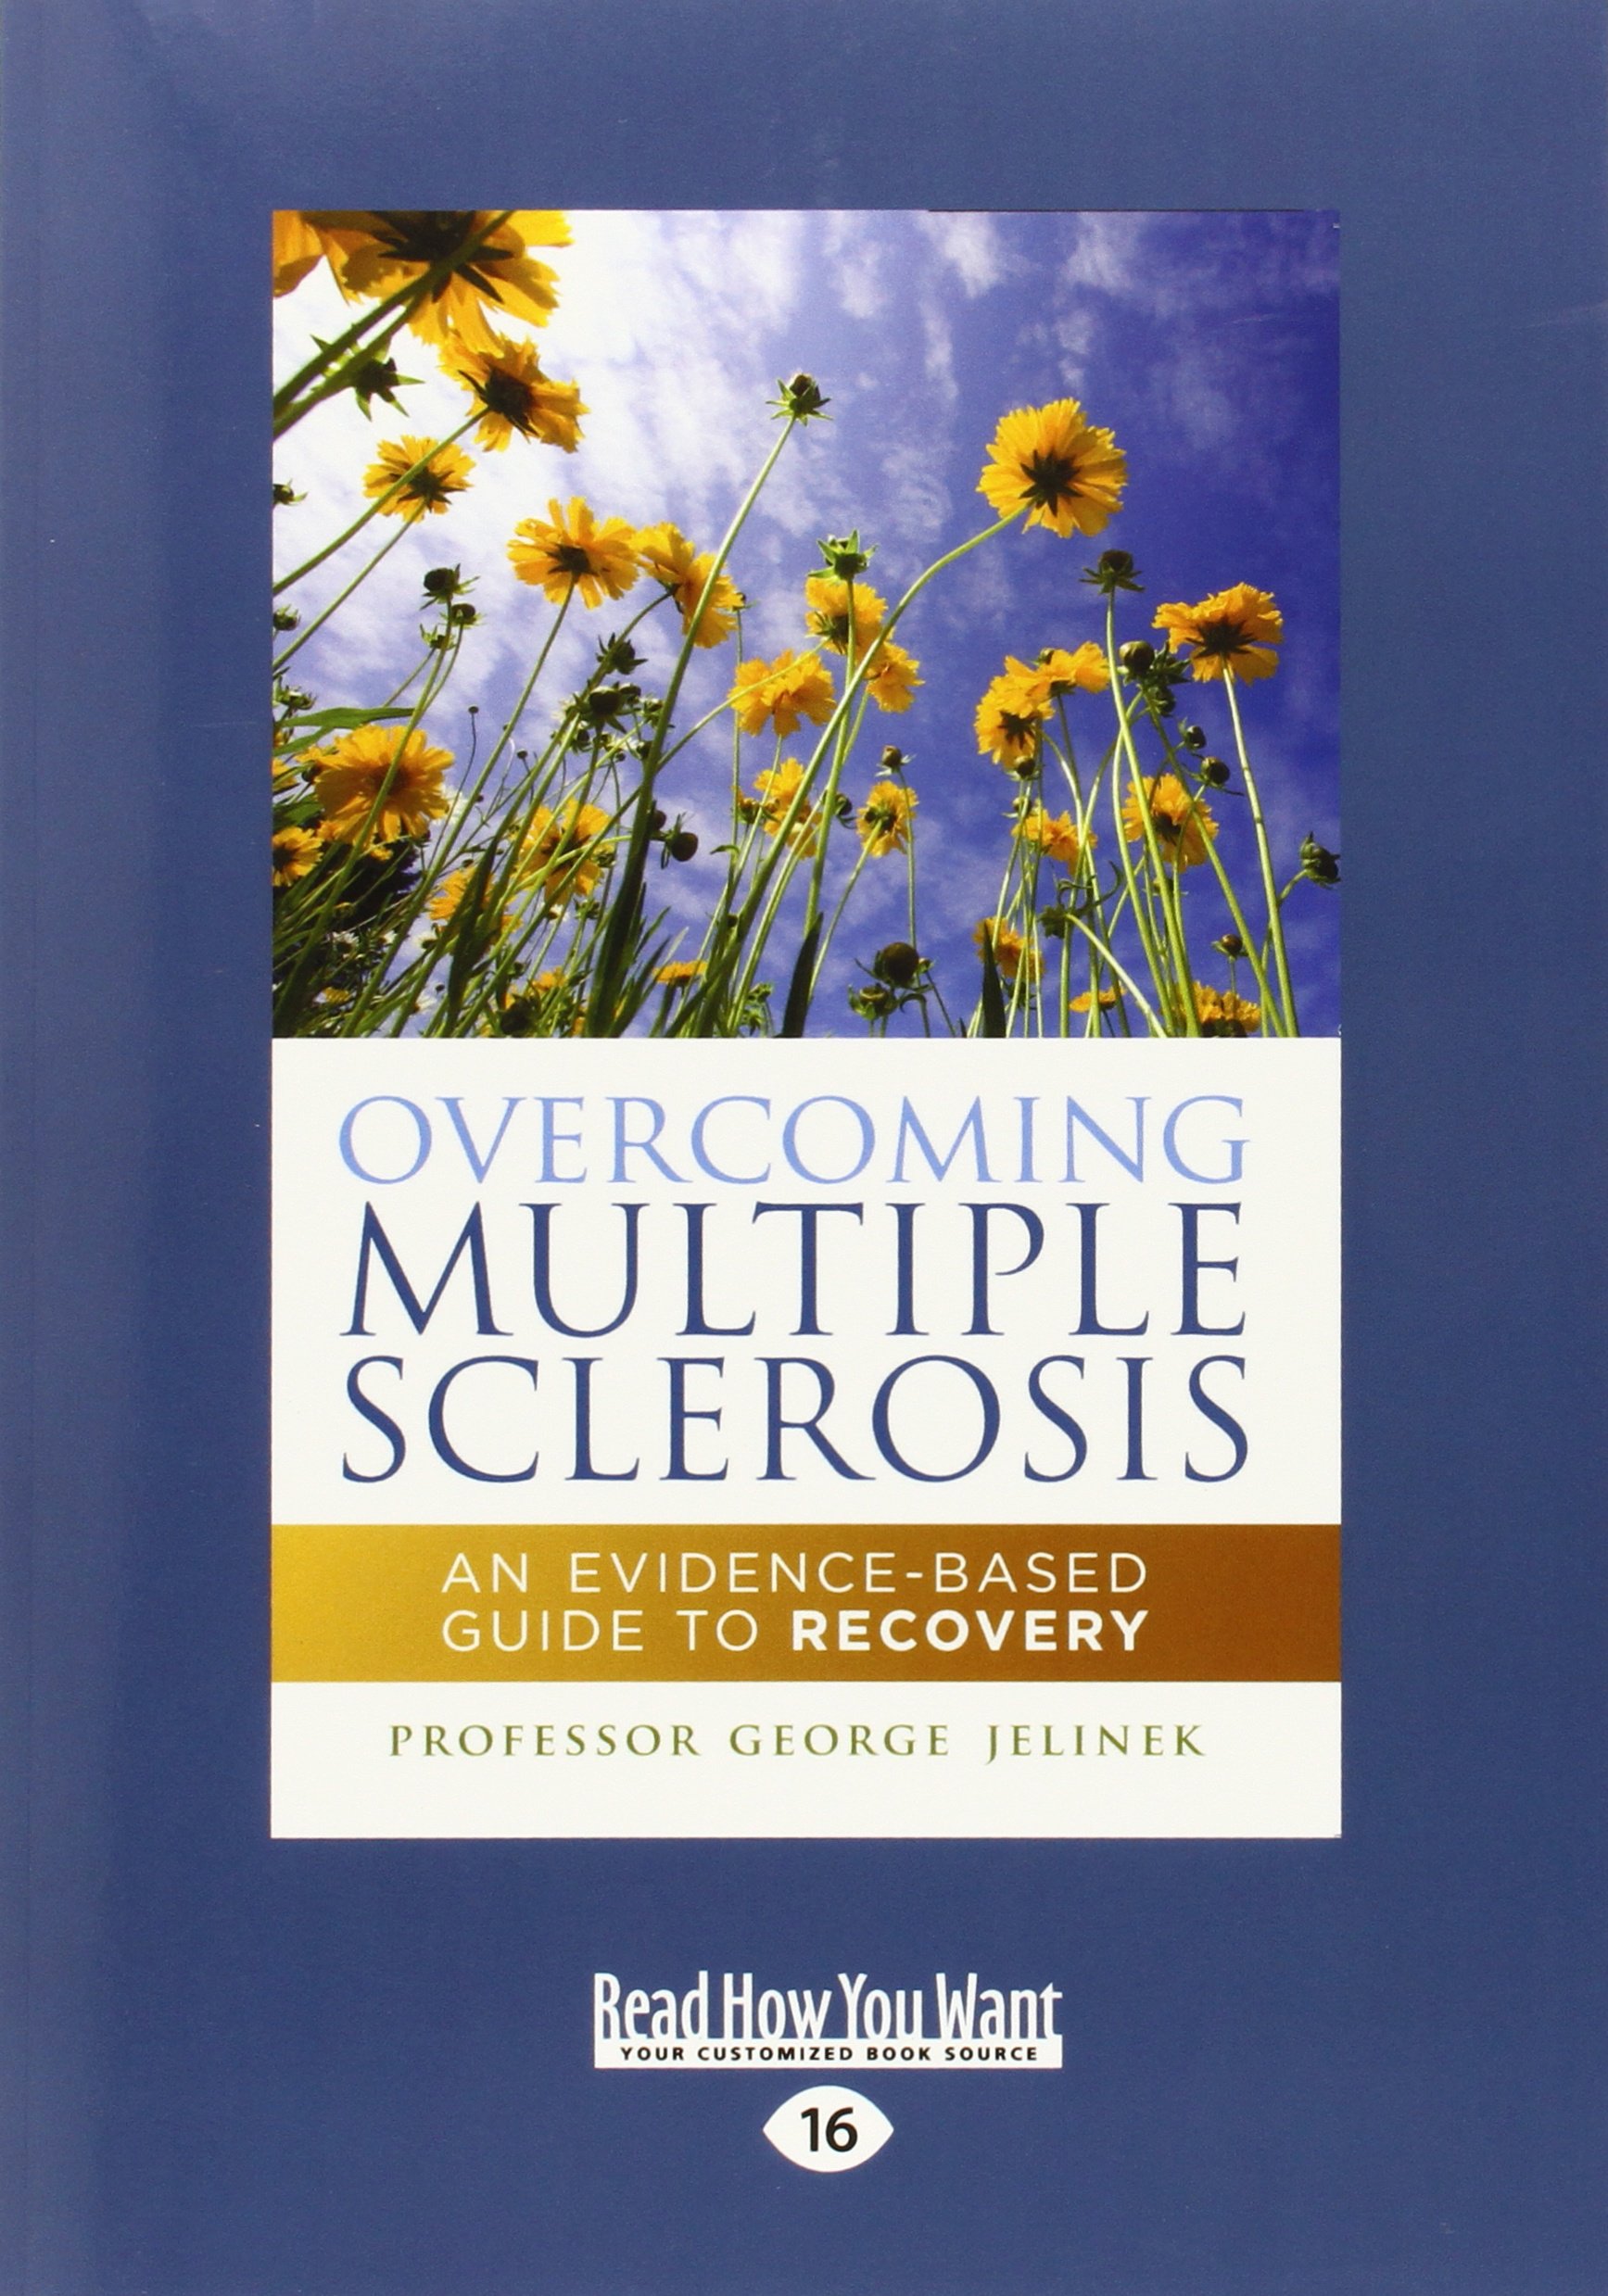 Overcoming Multiple Sclerosis An Evidence-Based Guide to Recovery